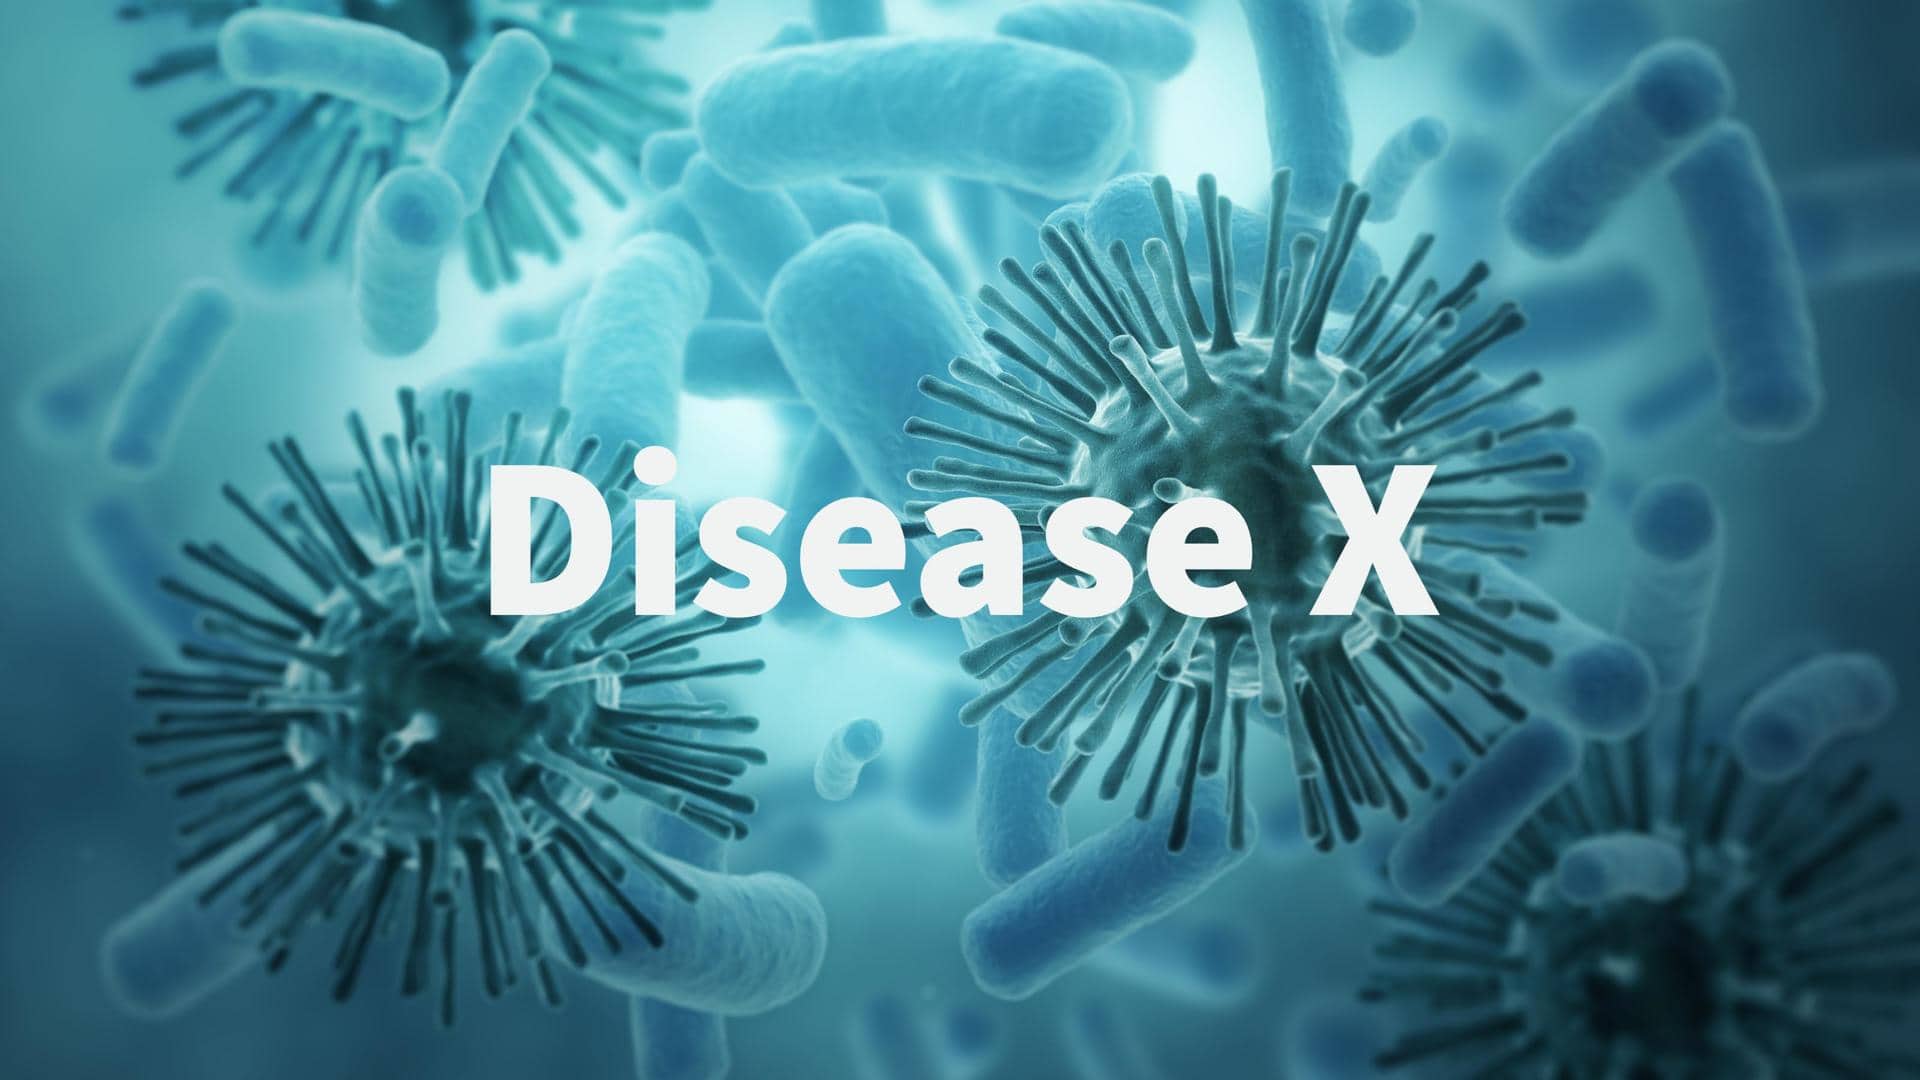 Disease X: Here's everything we know so far